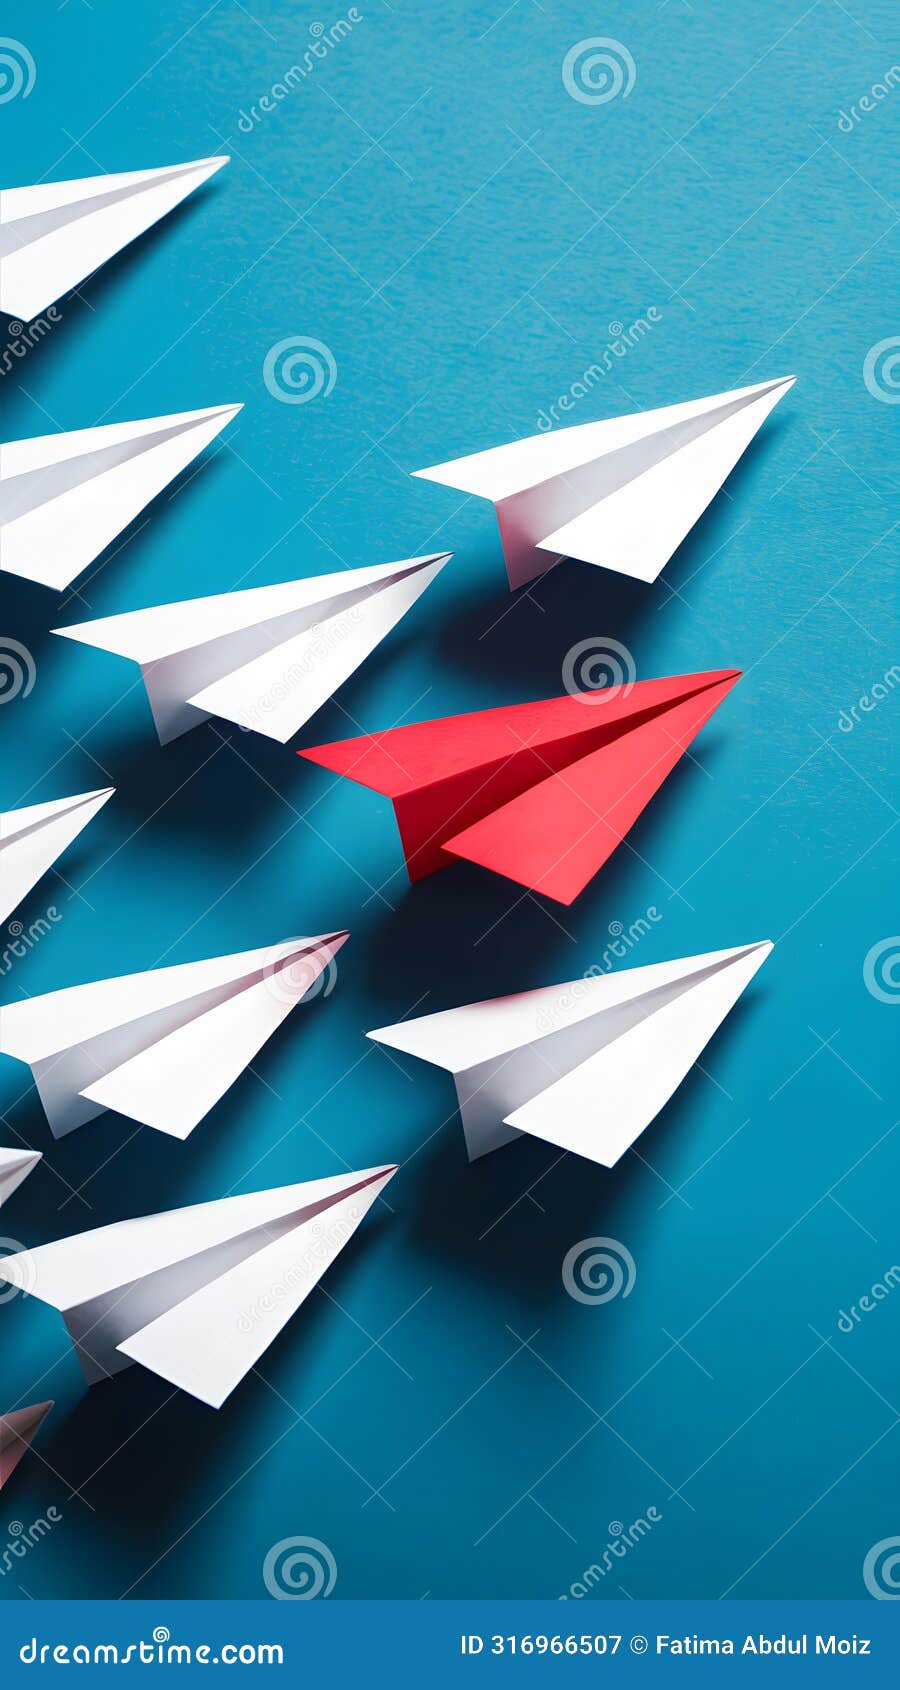 blue background, paper airplanes with red outlier, izing individuality and deviation